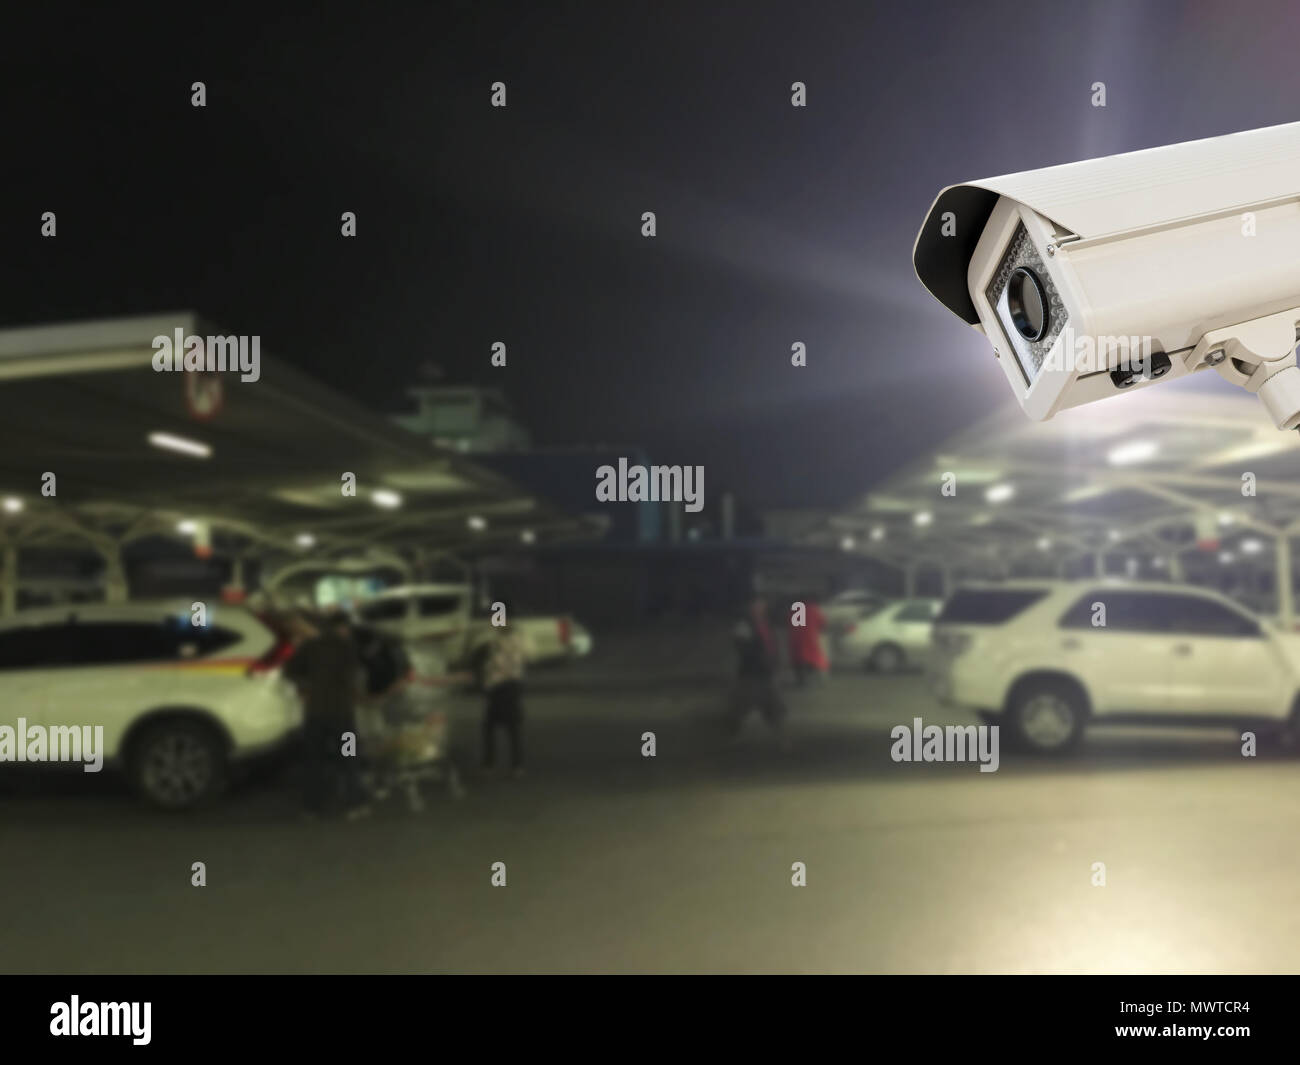 The CCTV Security Camera operating in parking lot car at night time blur  background Stock Photo - Alamy